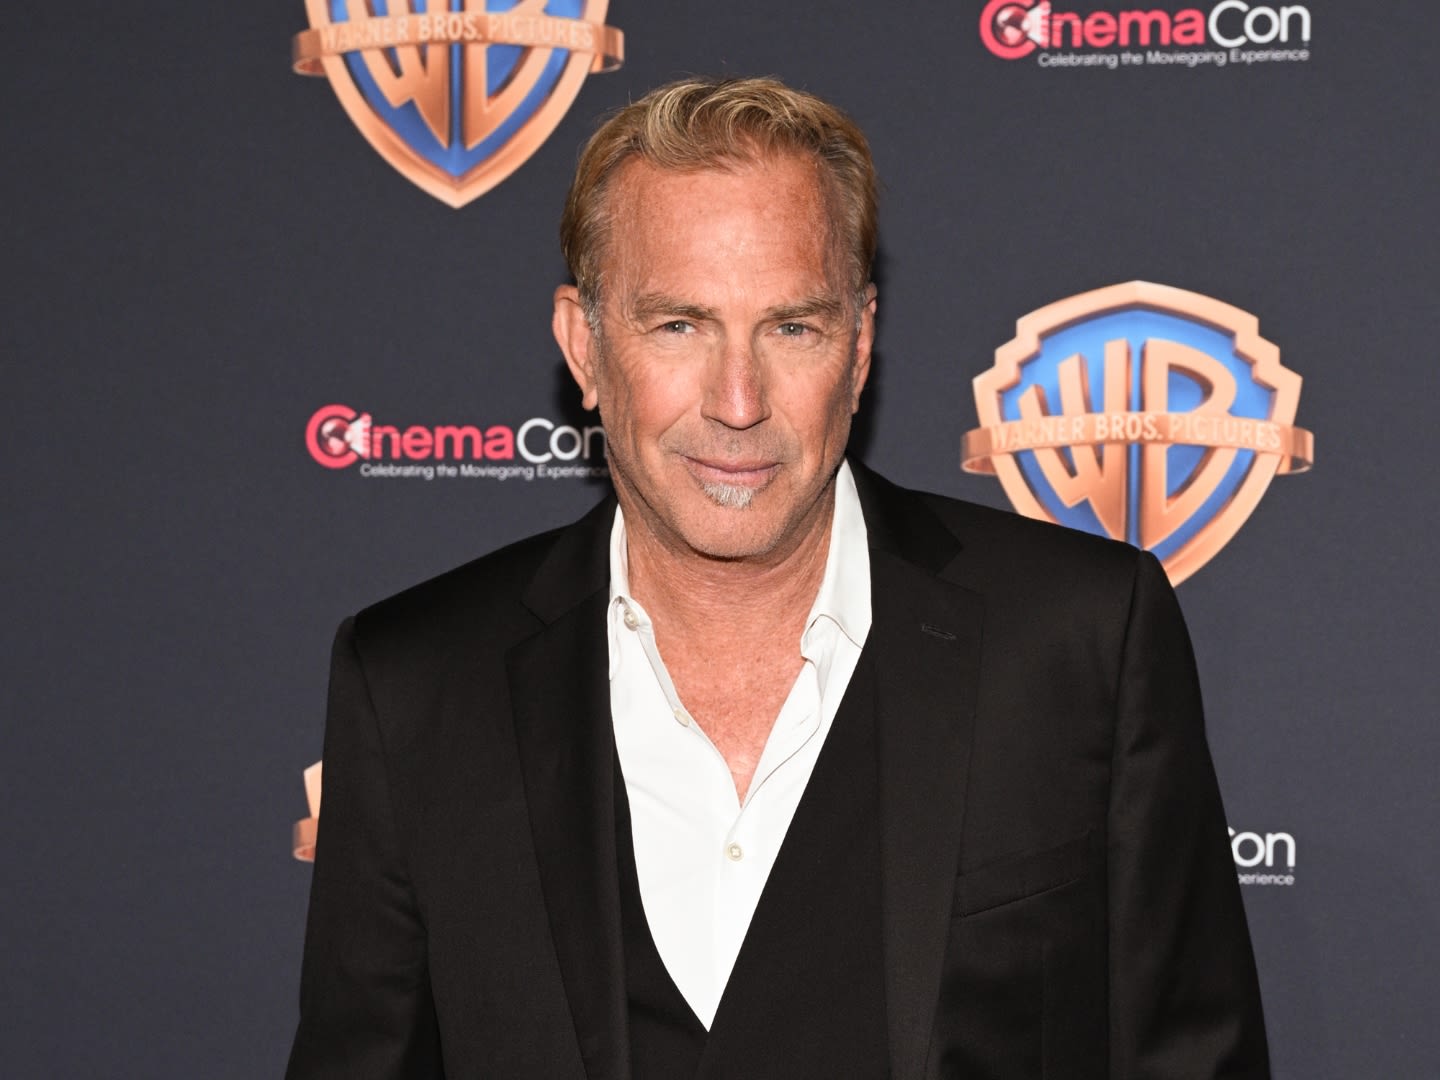 Kevin Costner Isn’t Doing Himself Any Favors in ‘Nepo Baby’ Debate With Latest Comments on Casting Son